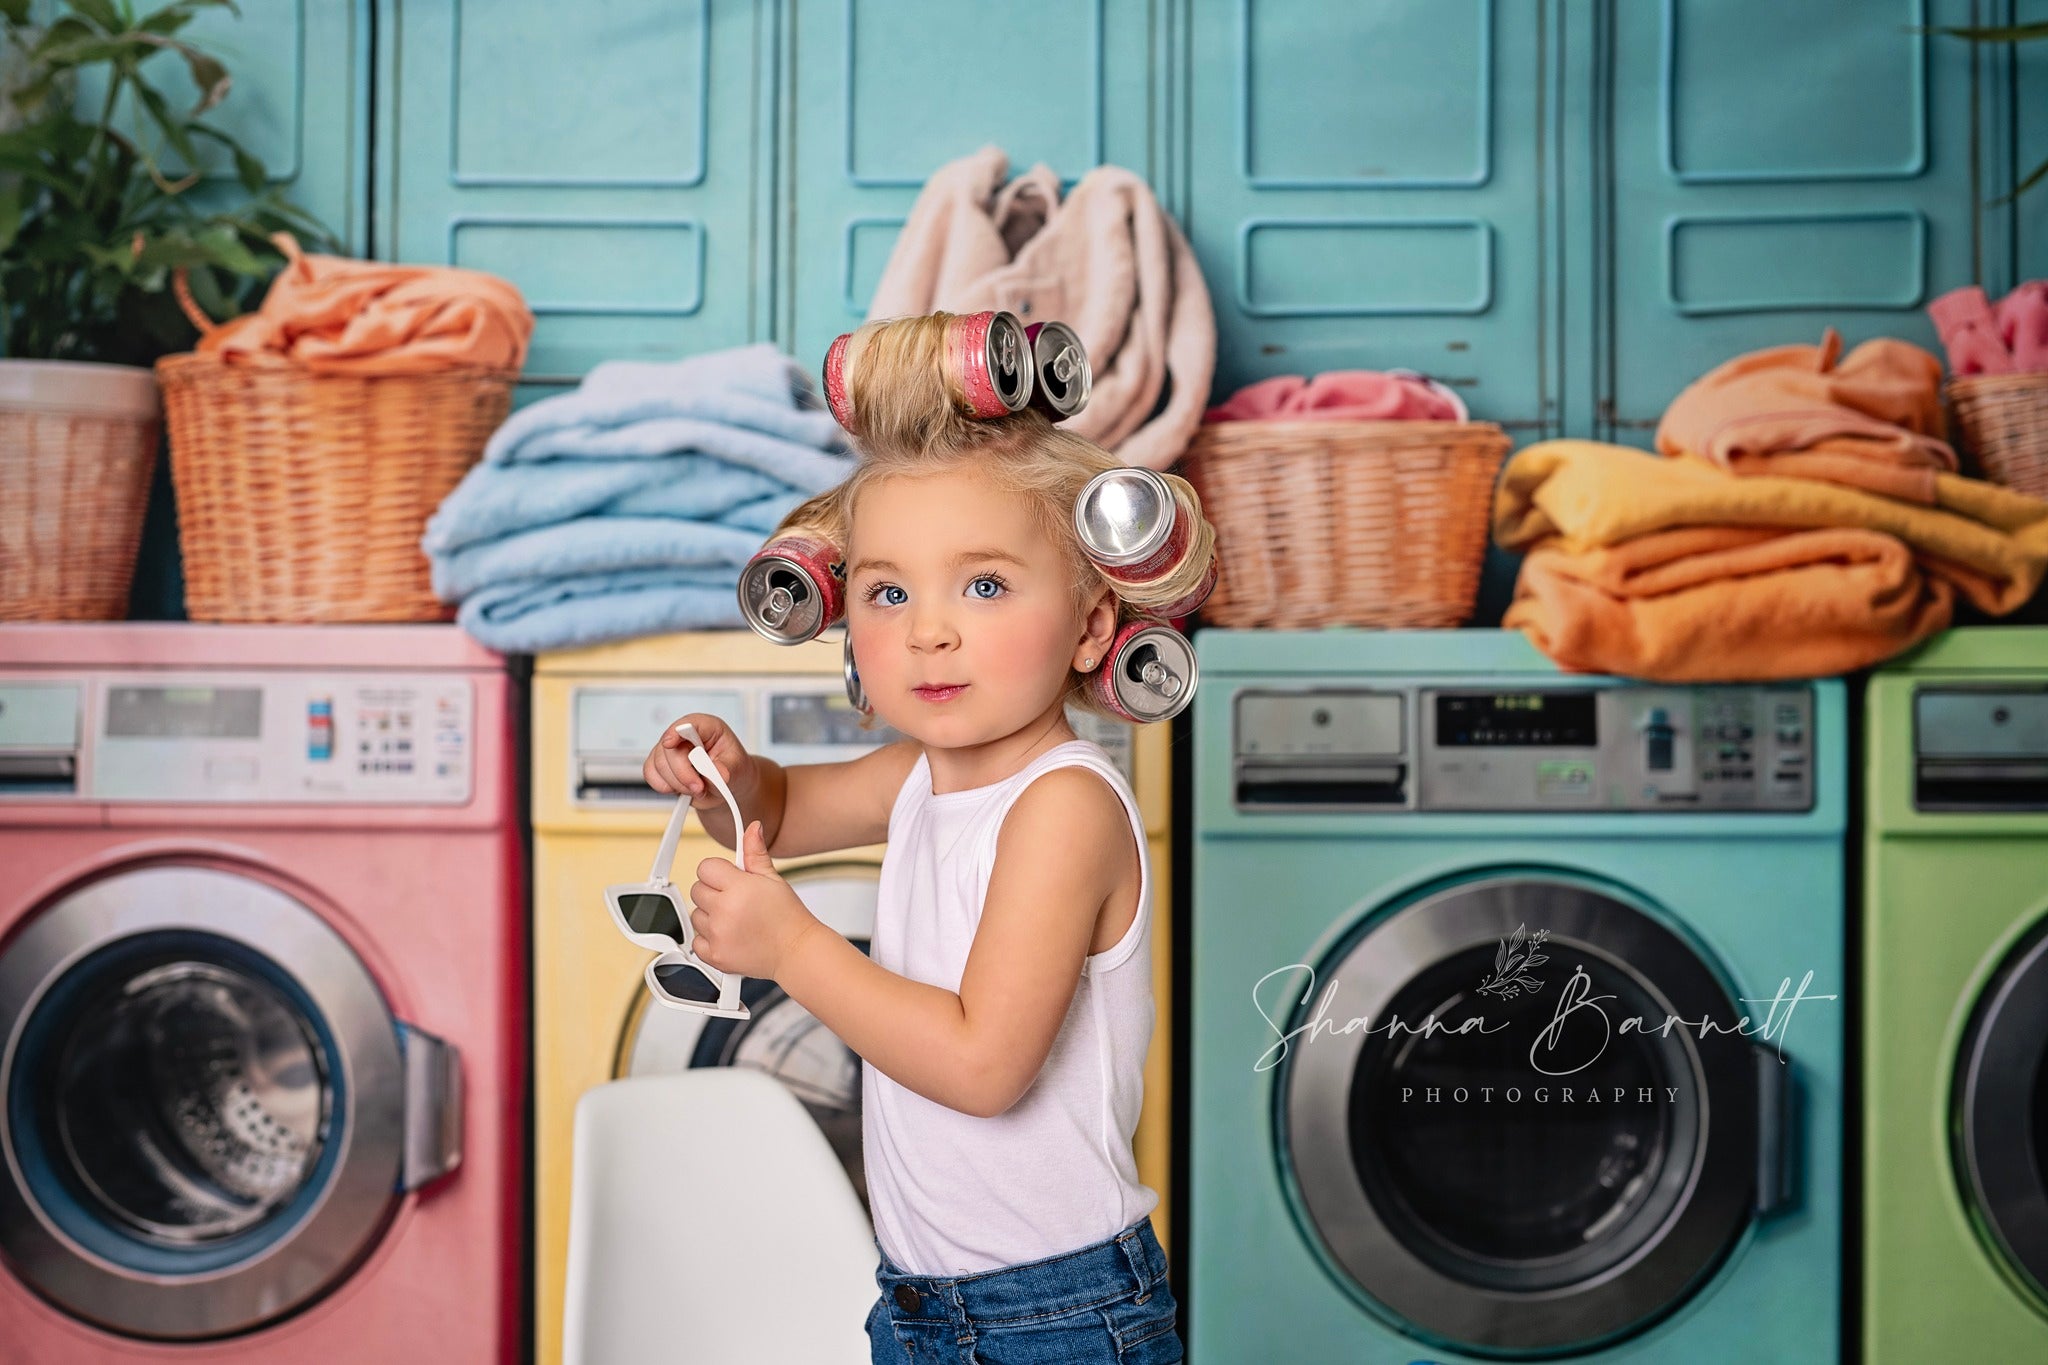 Girl with can hairstyle in front of washing machine backdrop